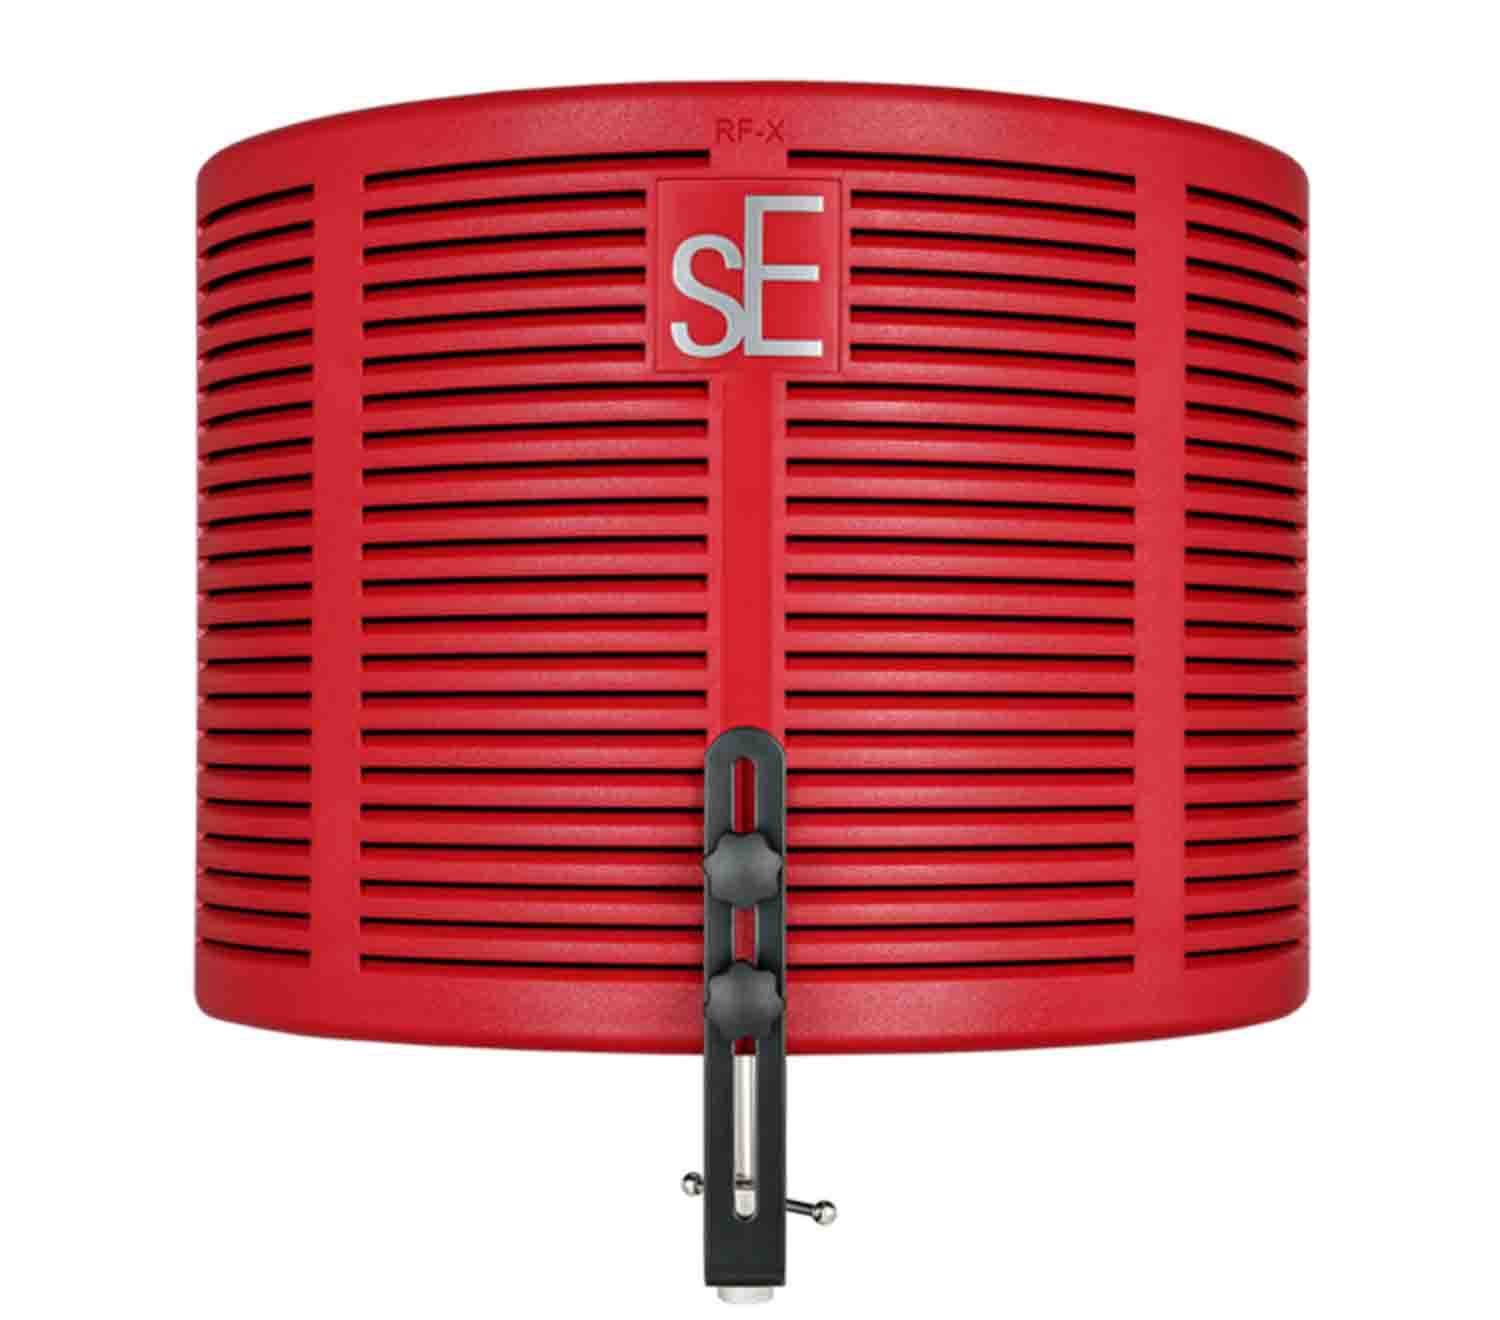 sE Electronics RF-X RB Portable Isolation Filter X - Red - Hollywood DJ